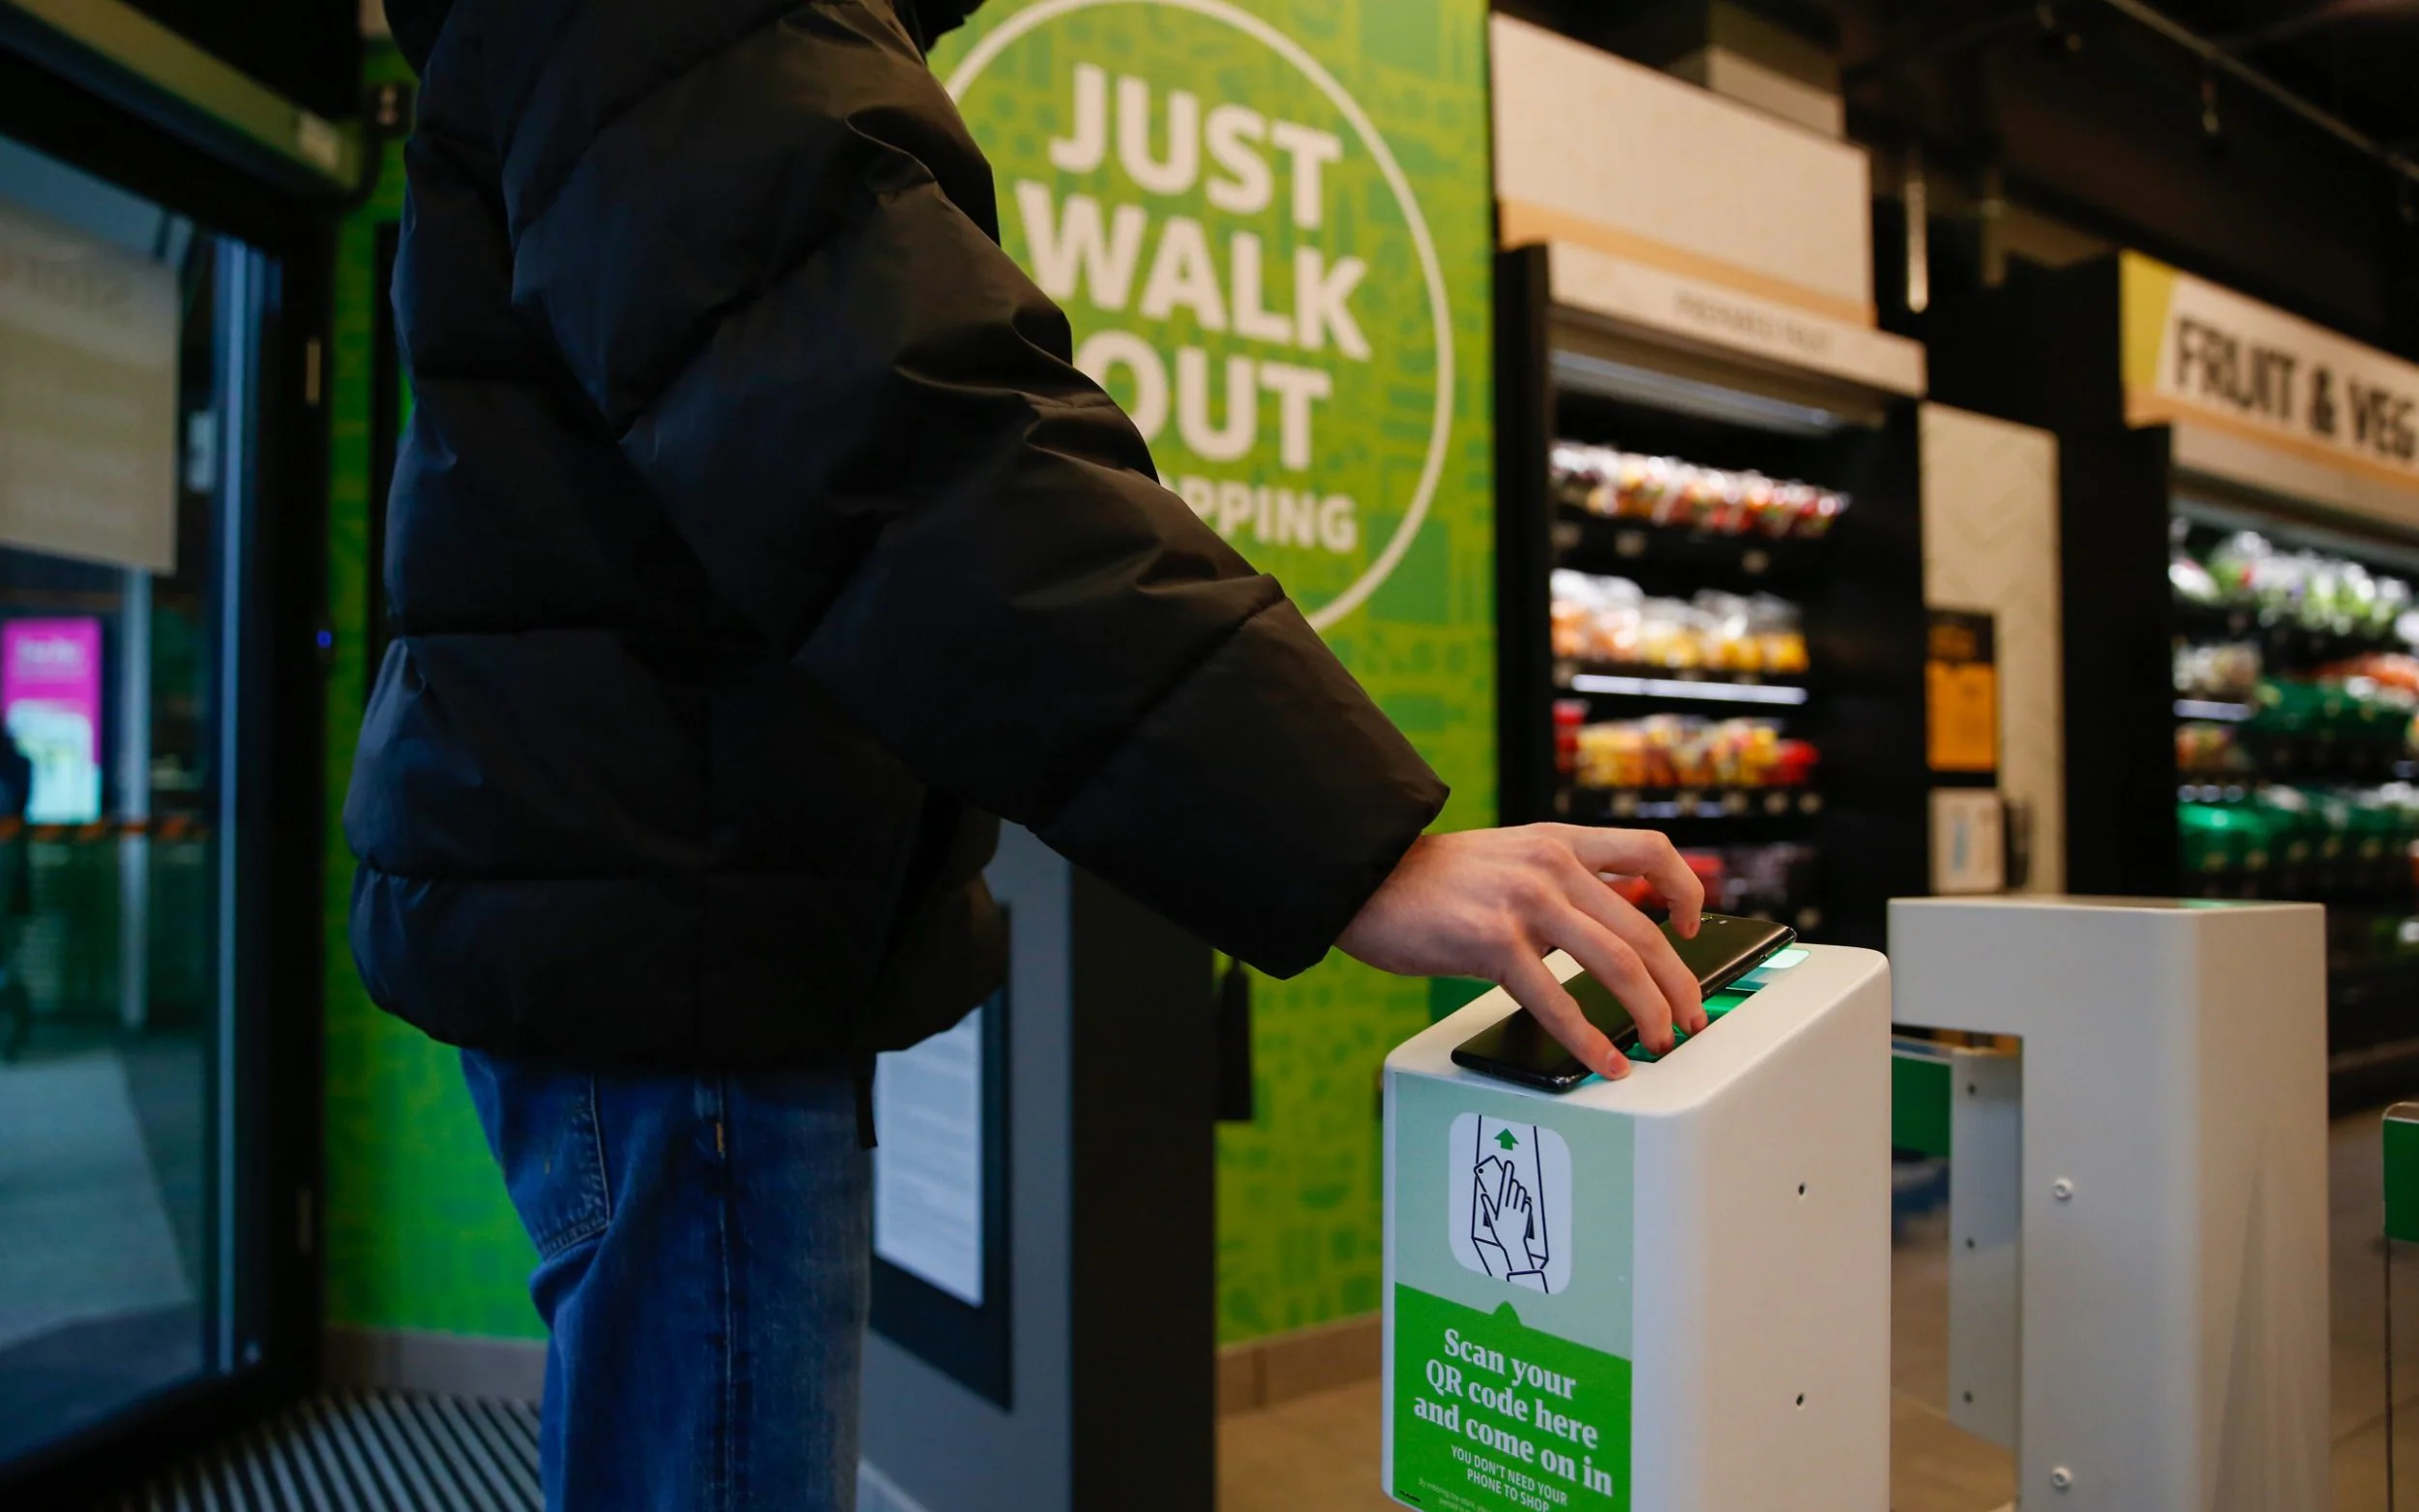 Amazon is abandoning Just Walk Out technology in its grocery shops